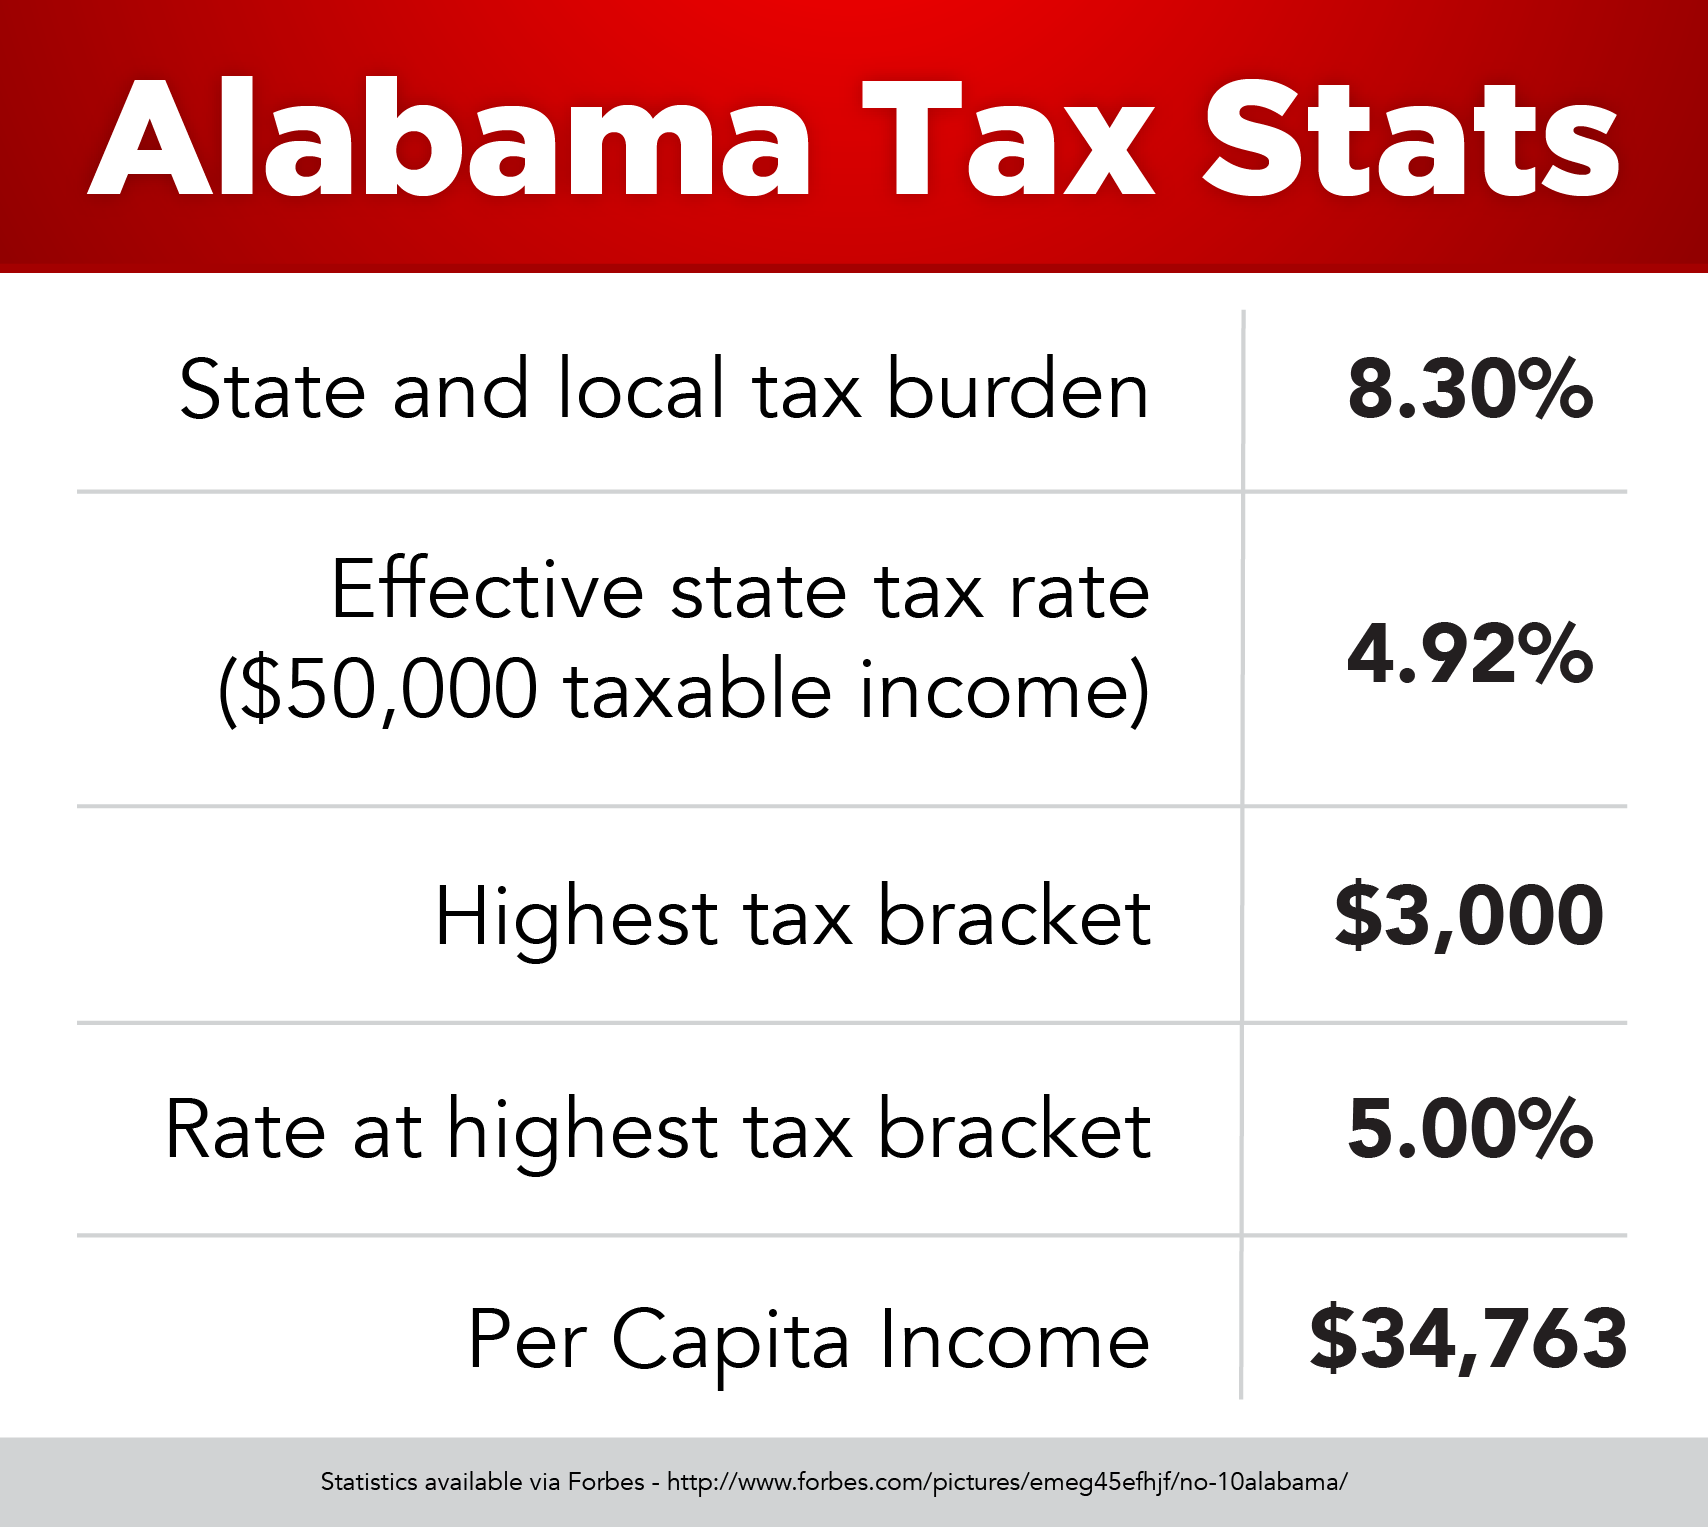 happy-tax-day-forbes-says-alabama-is-the-10th-best-state-for-taxes